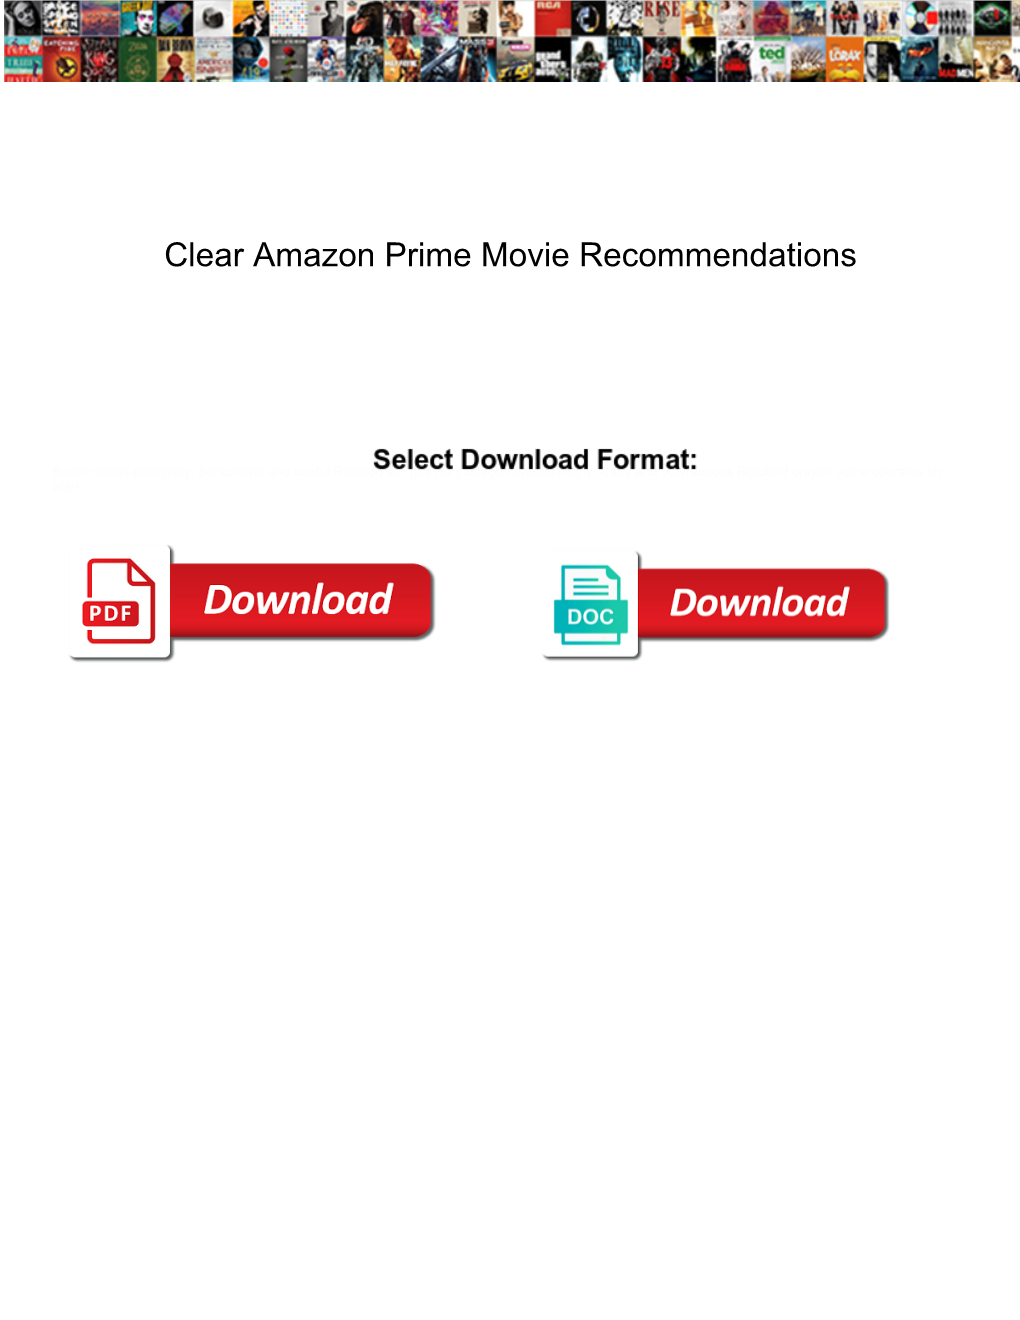 Clear Amazon Prime Movie Recommendations